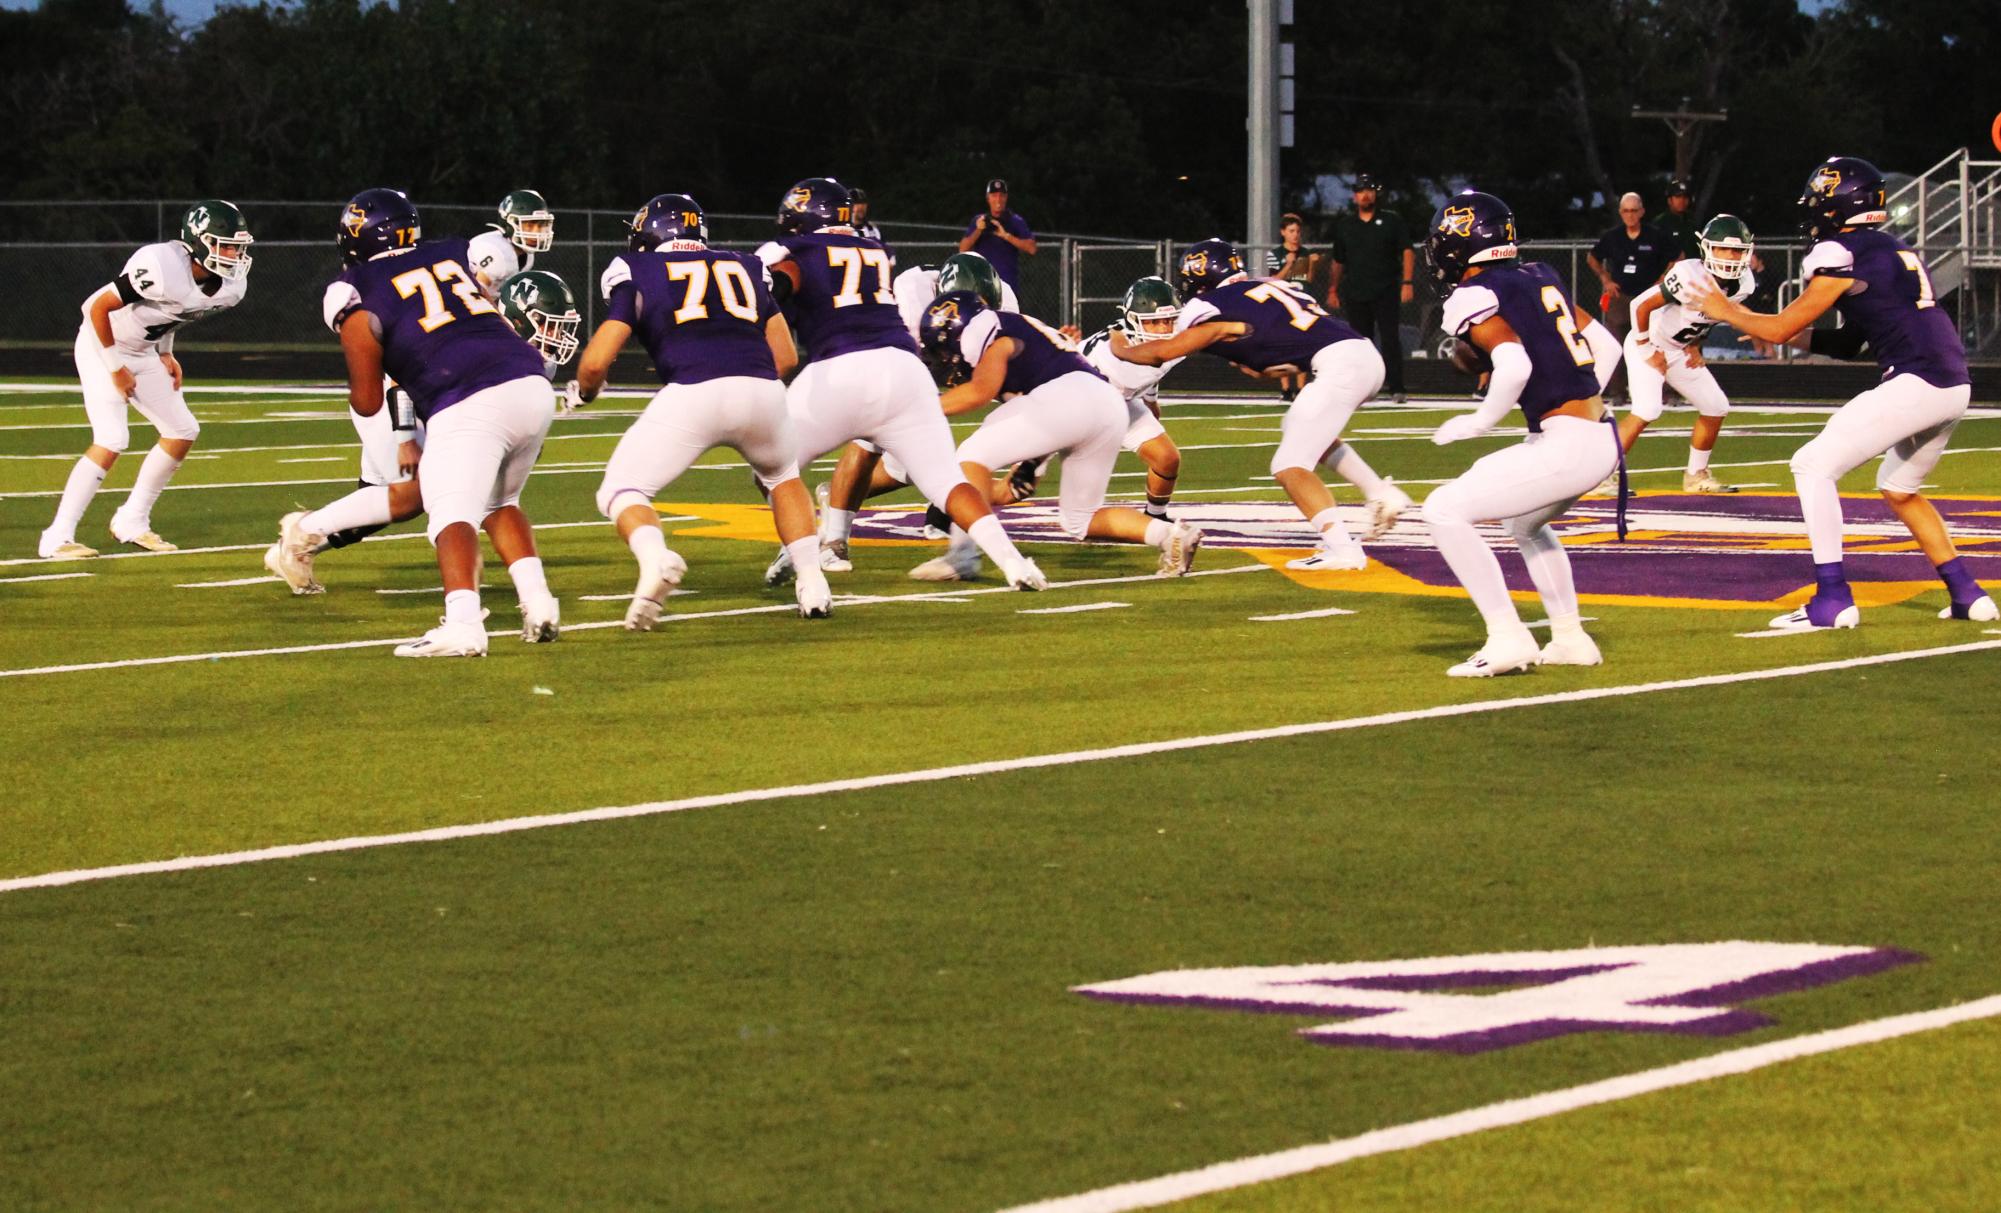 The Bison work together on an offensive play while taking a victory over Normangee in their homecoming game.